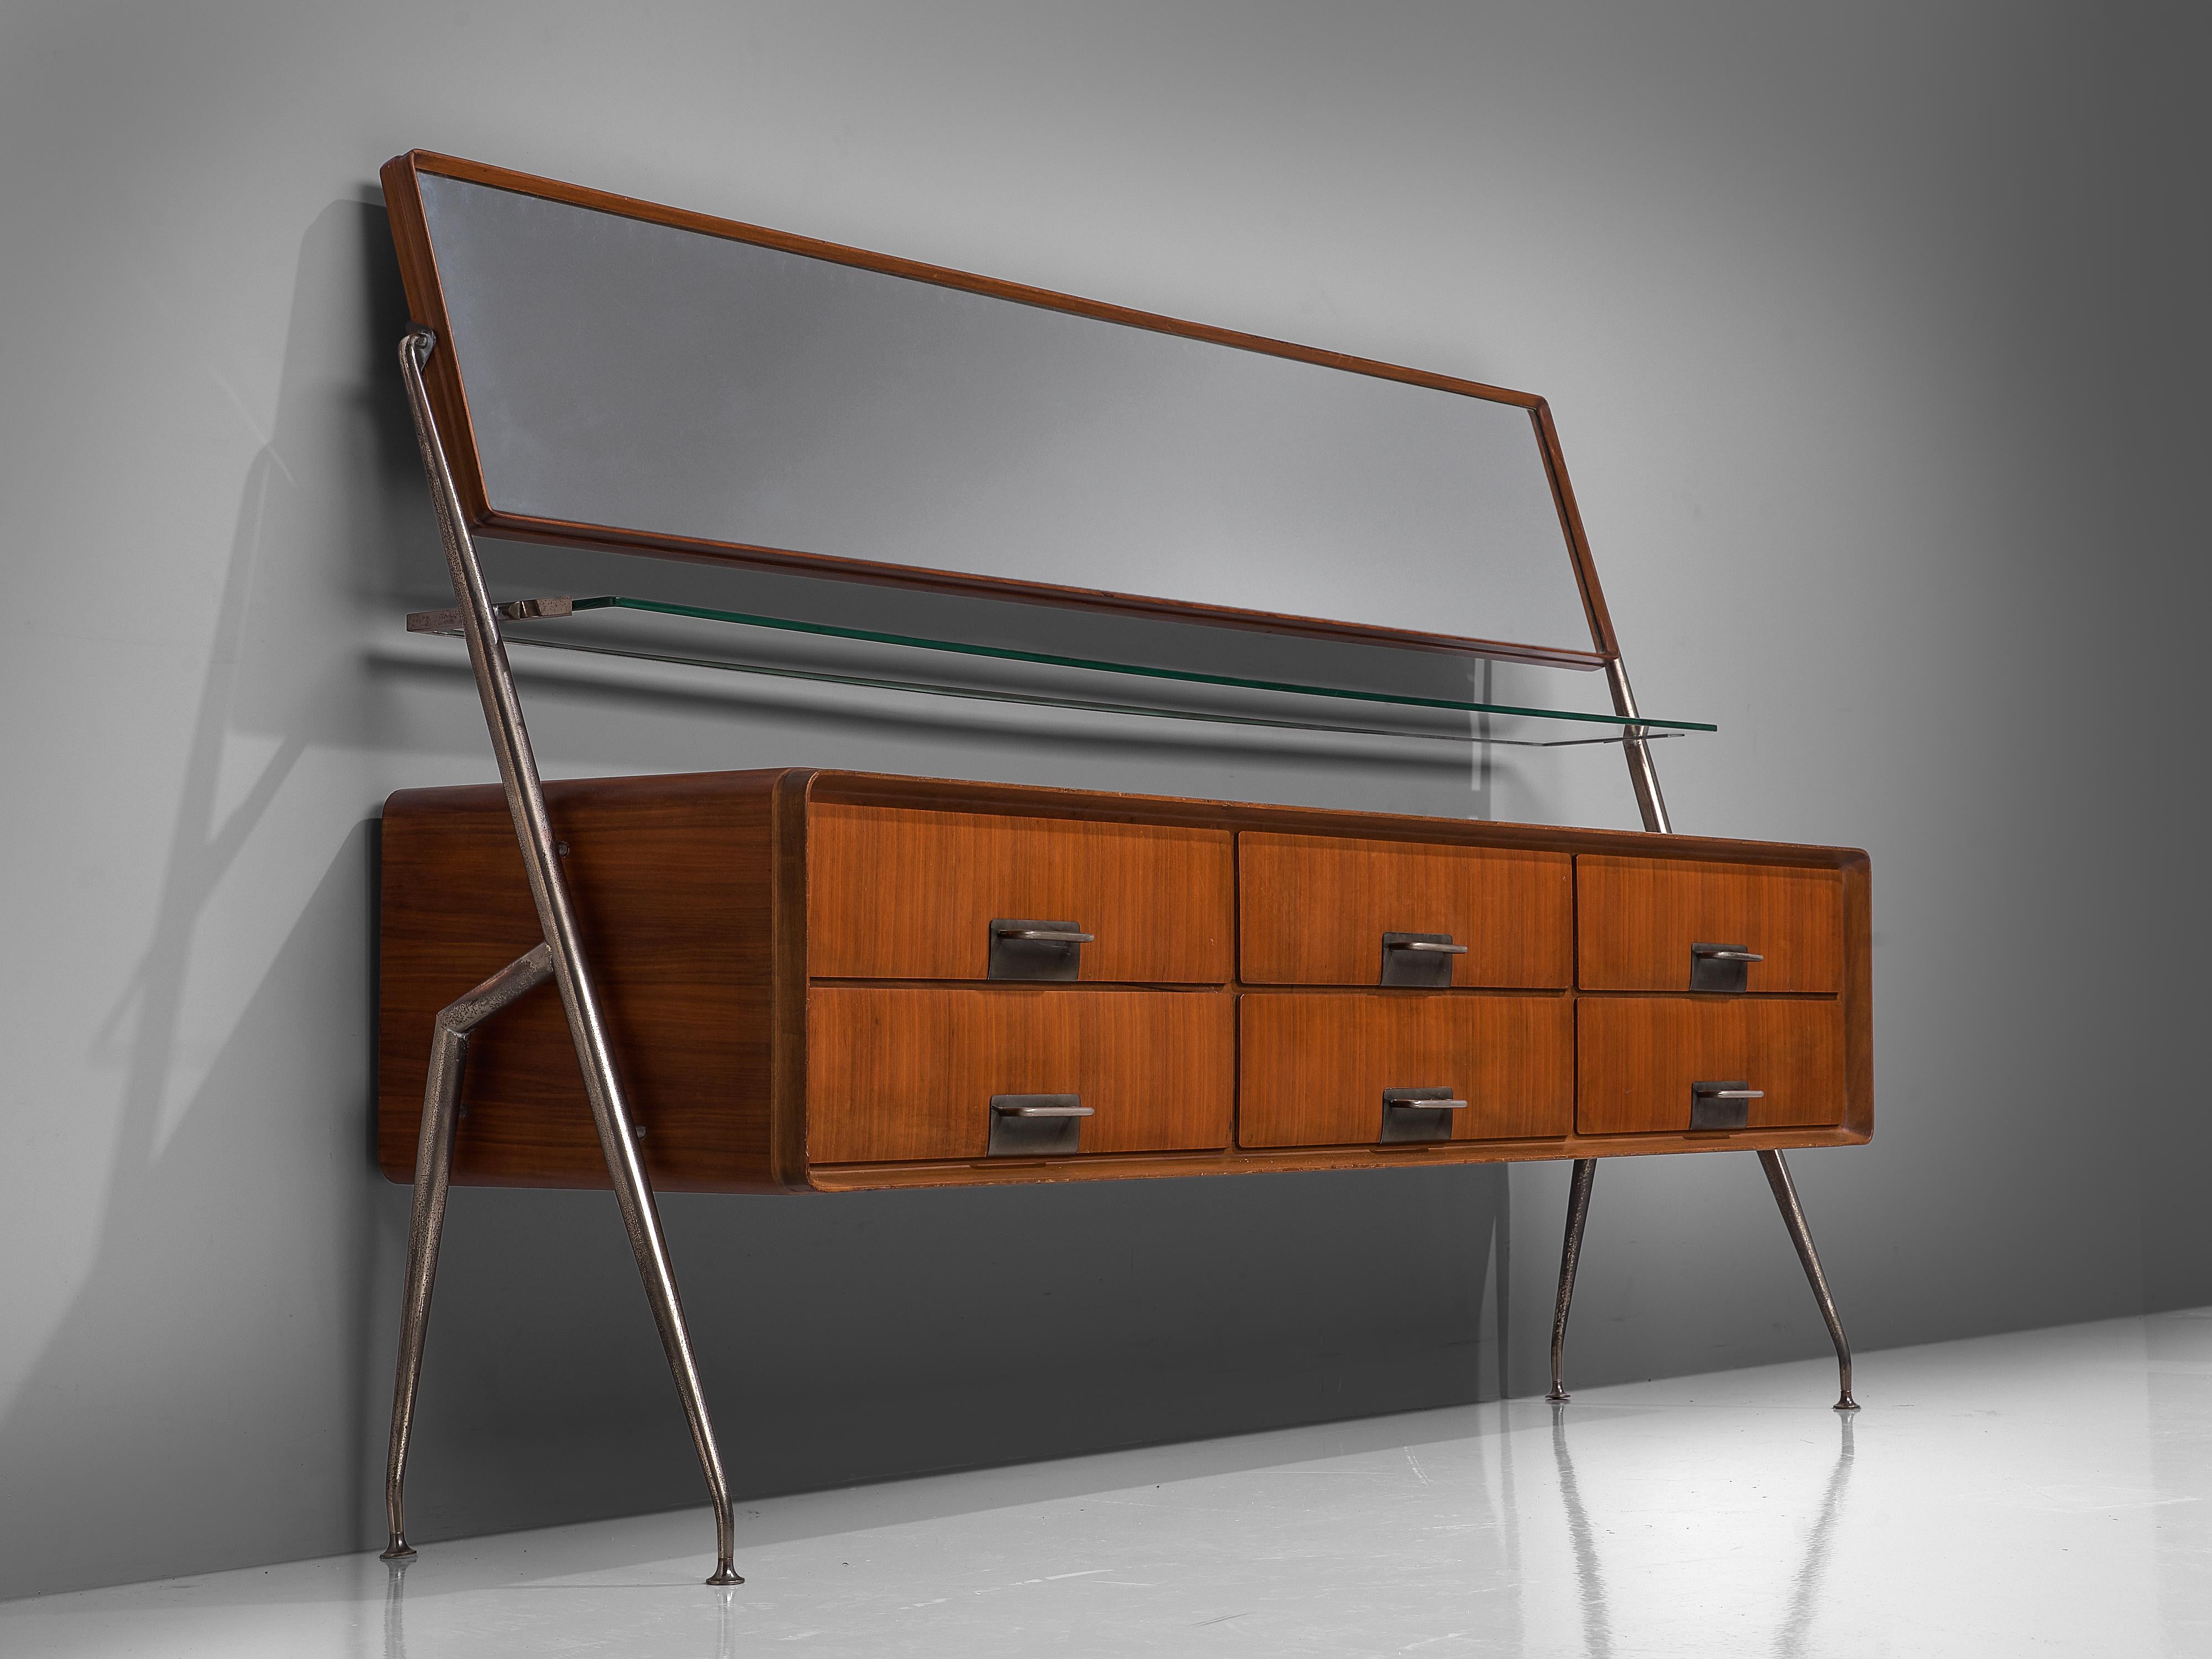 Silvio Cavatorta, sideboard with mirror, metal, mahogany veneer, glass, Italy, 1958.

Elegant Italian sideboard by Silvio Cavatorta. This cabinet is equipped with six drawers, a glass shelf and a large mirror. The mahogany veneer contrasts